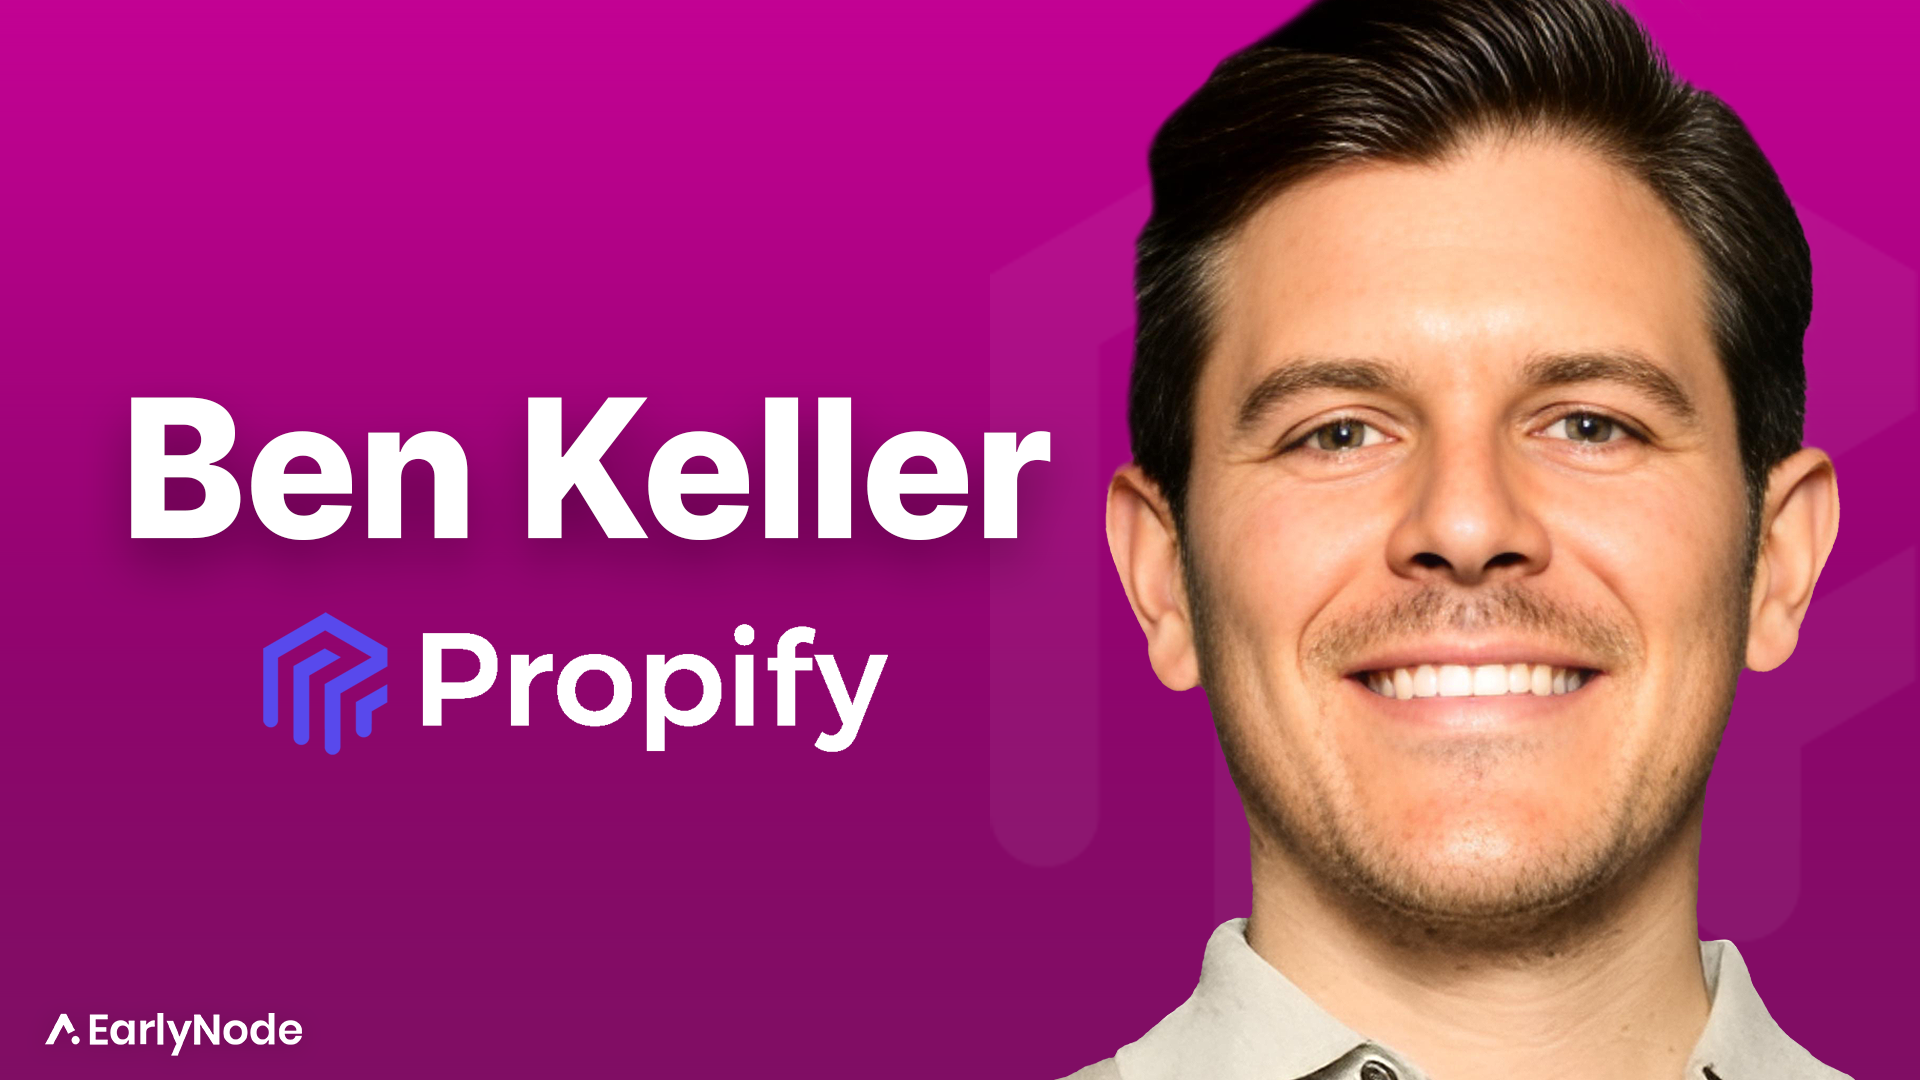 $0 to +$1M ARR: Ben Keller’s Journey to Grow Propify into the Go-To API for PropTech Startups